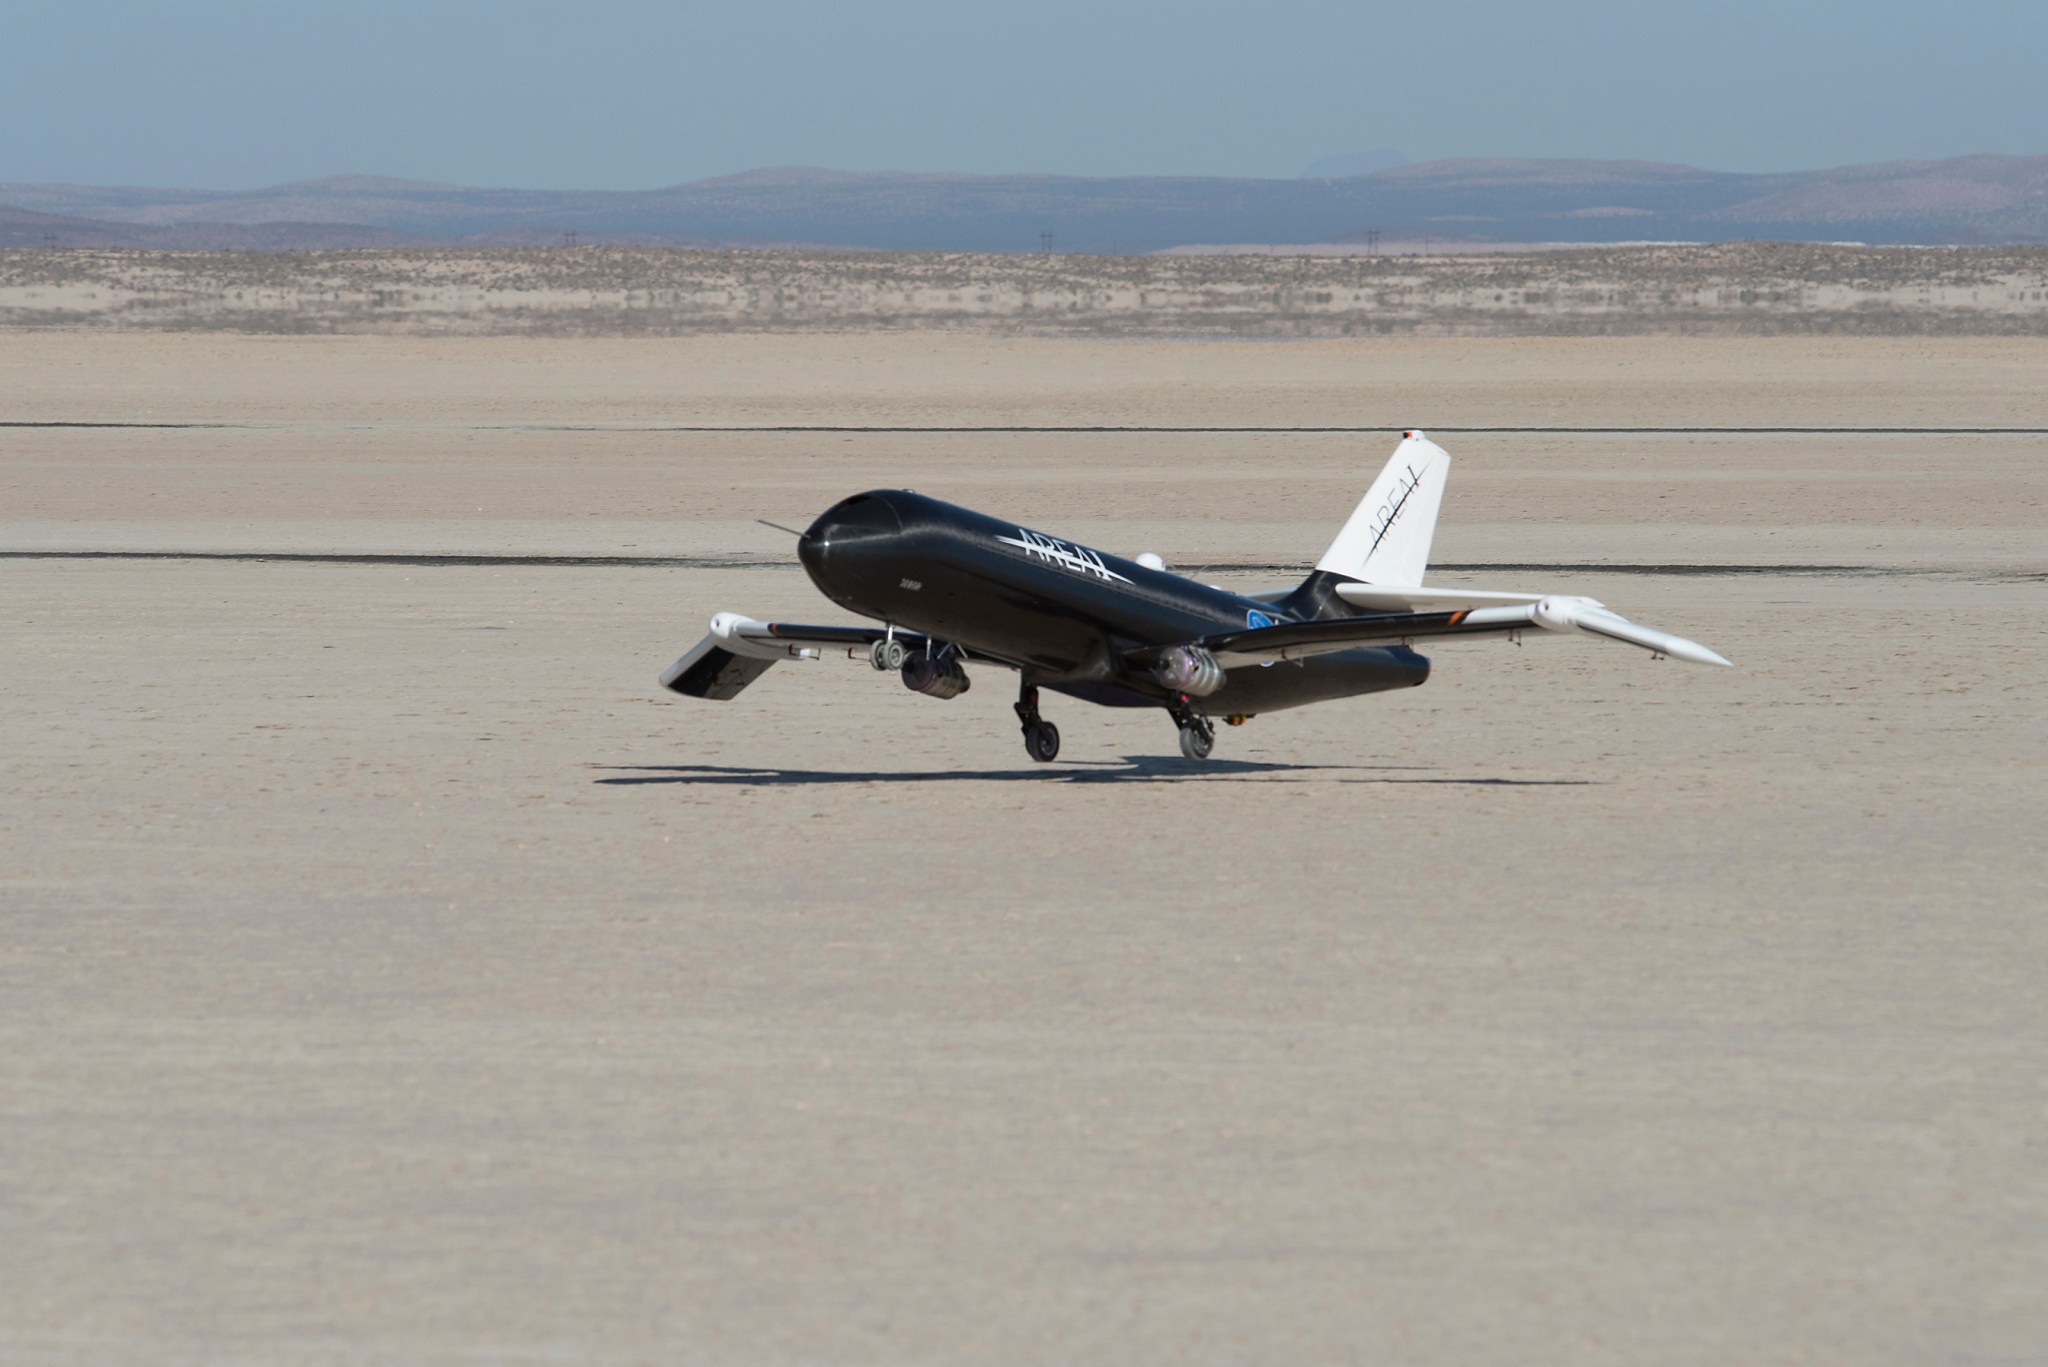 NASA used a remotely-controlled flight testbed called Prototype Technology-Evaluation Research Aircraft, or PTERA, to test the s